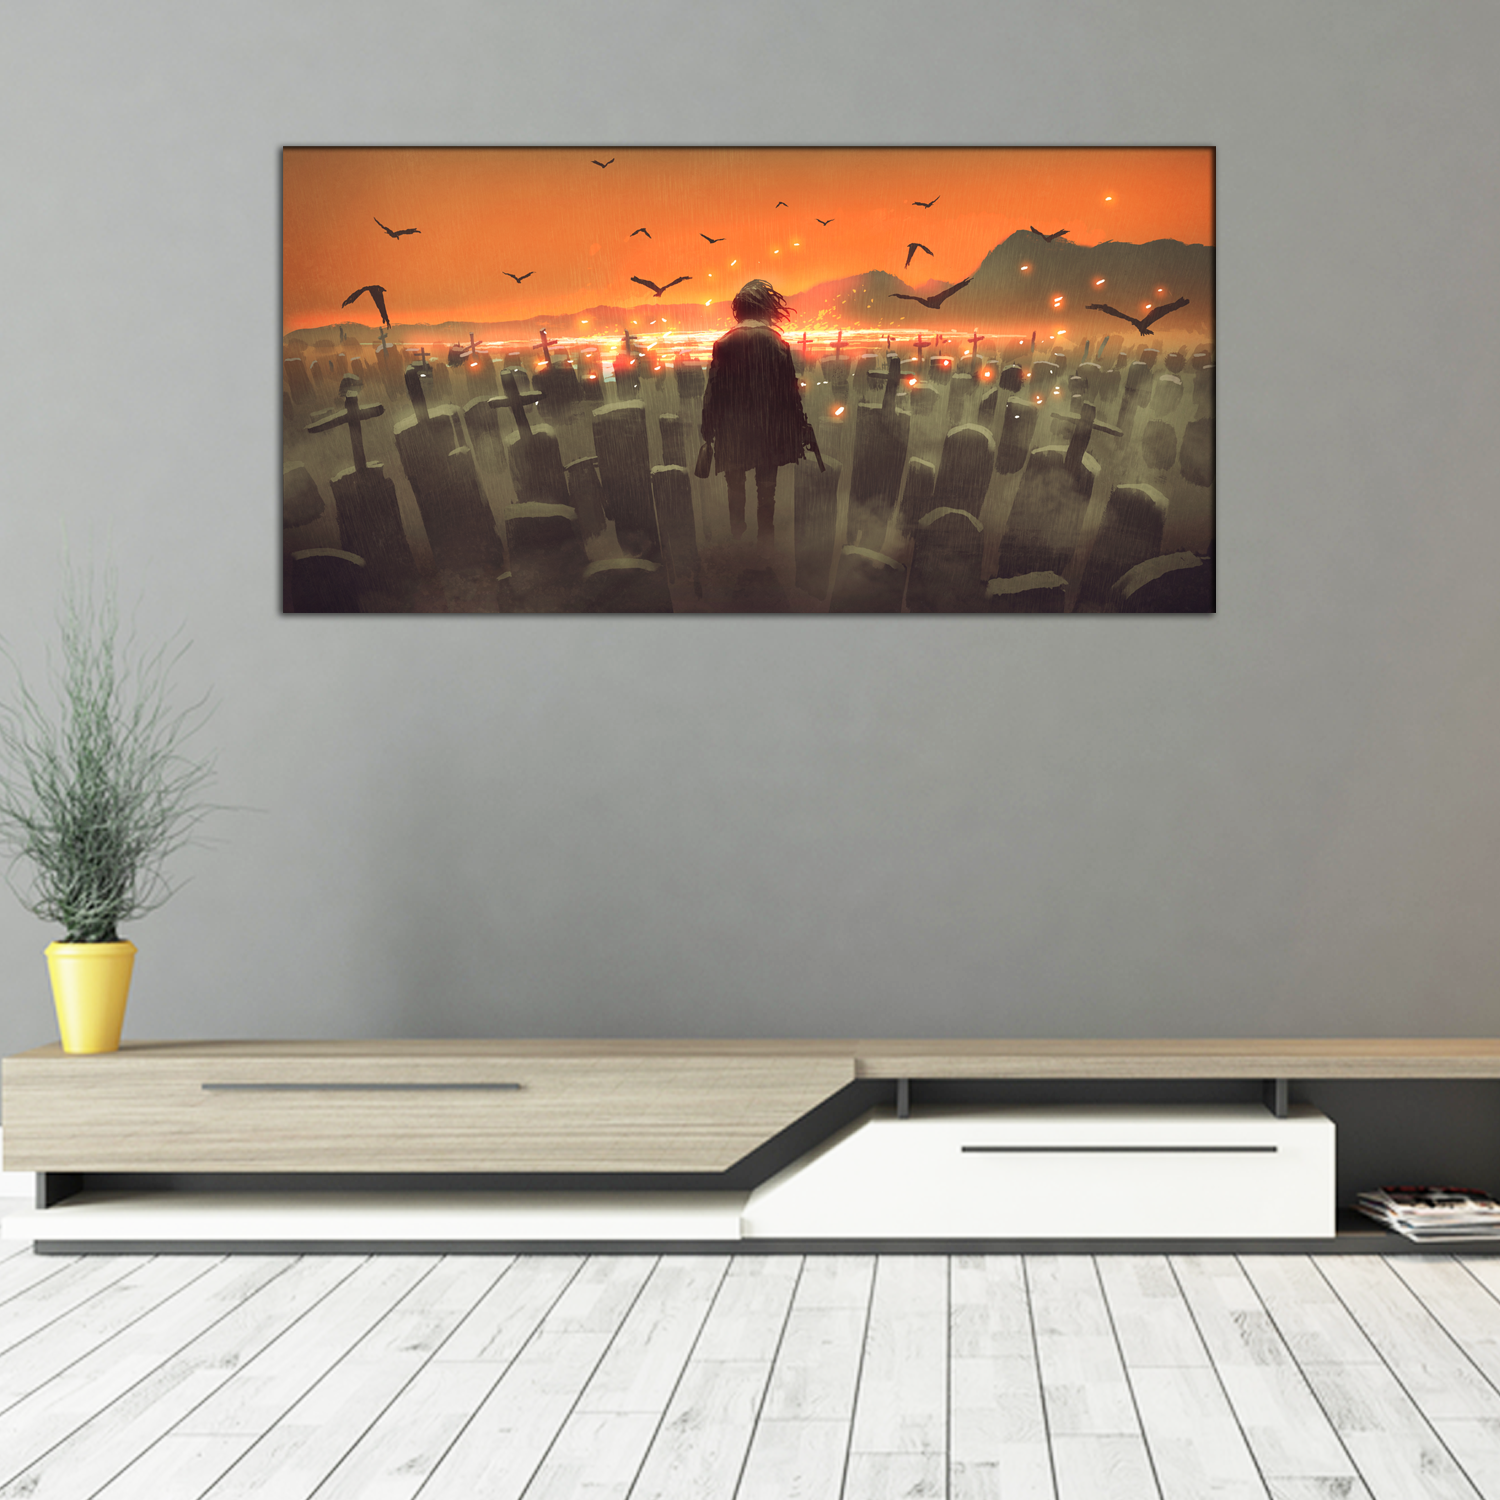 Drunk Man with a Gun Walking in a Graveyard Canvas Print Wall Painting